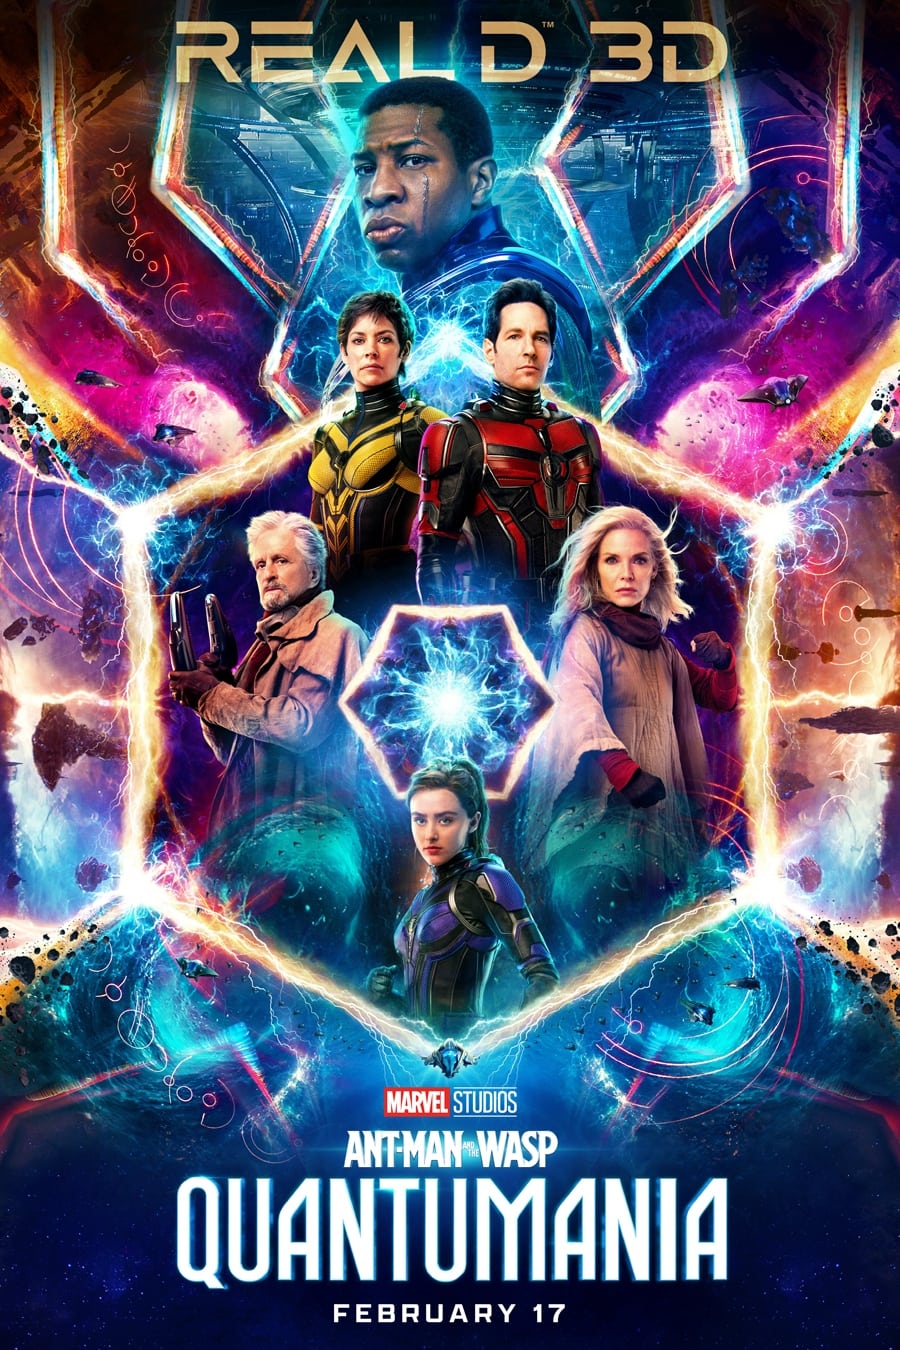 To [-Watch Full-] Ant-Man and the Wasp: Quantumania (2023) Movie HD